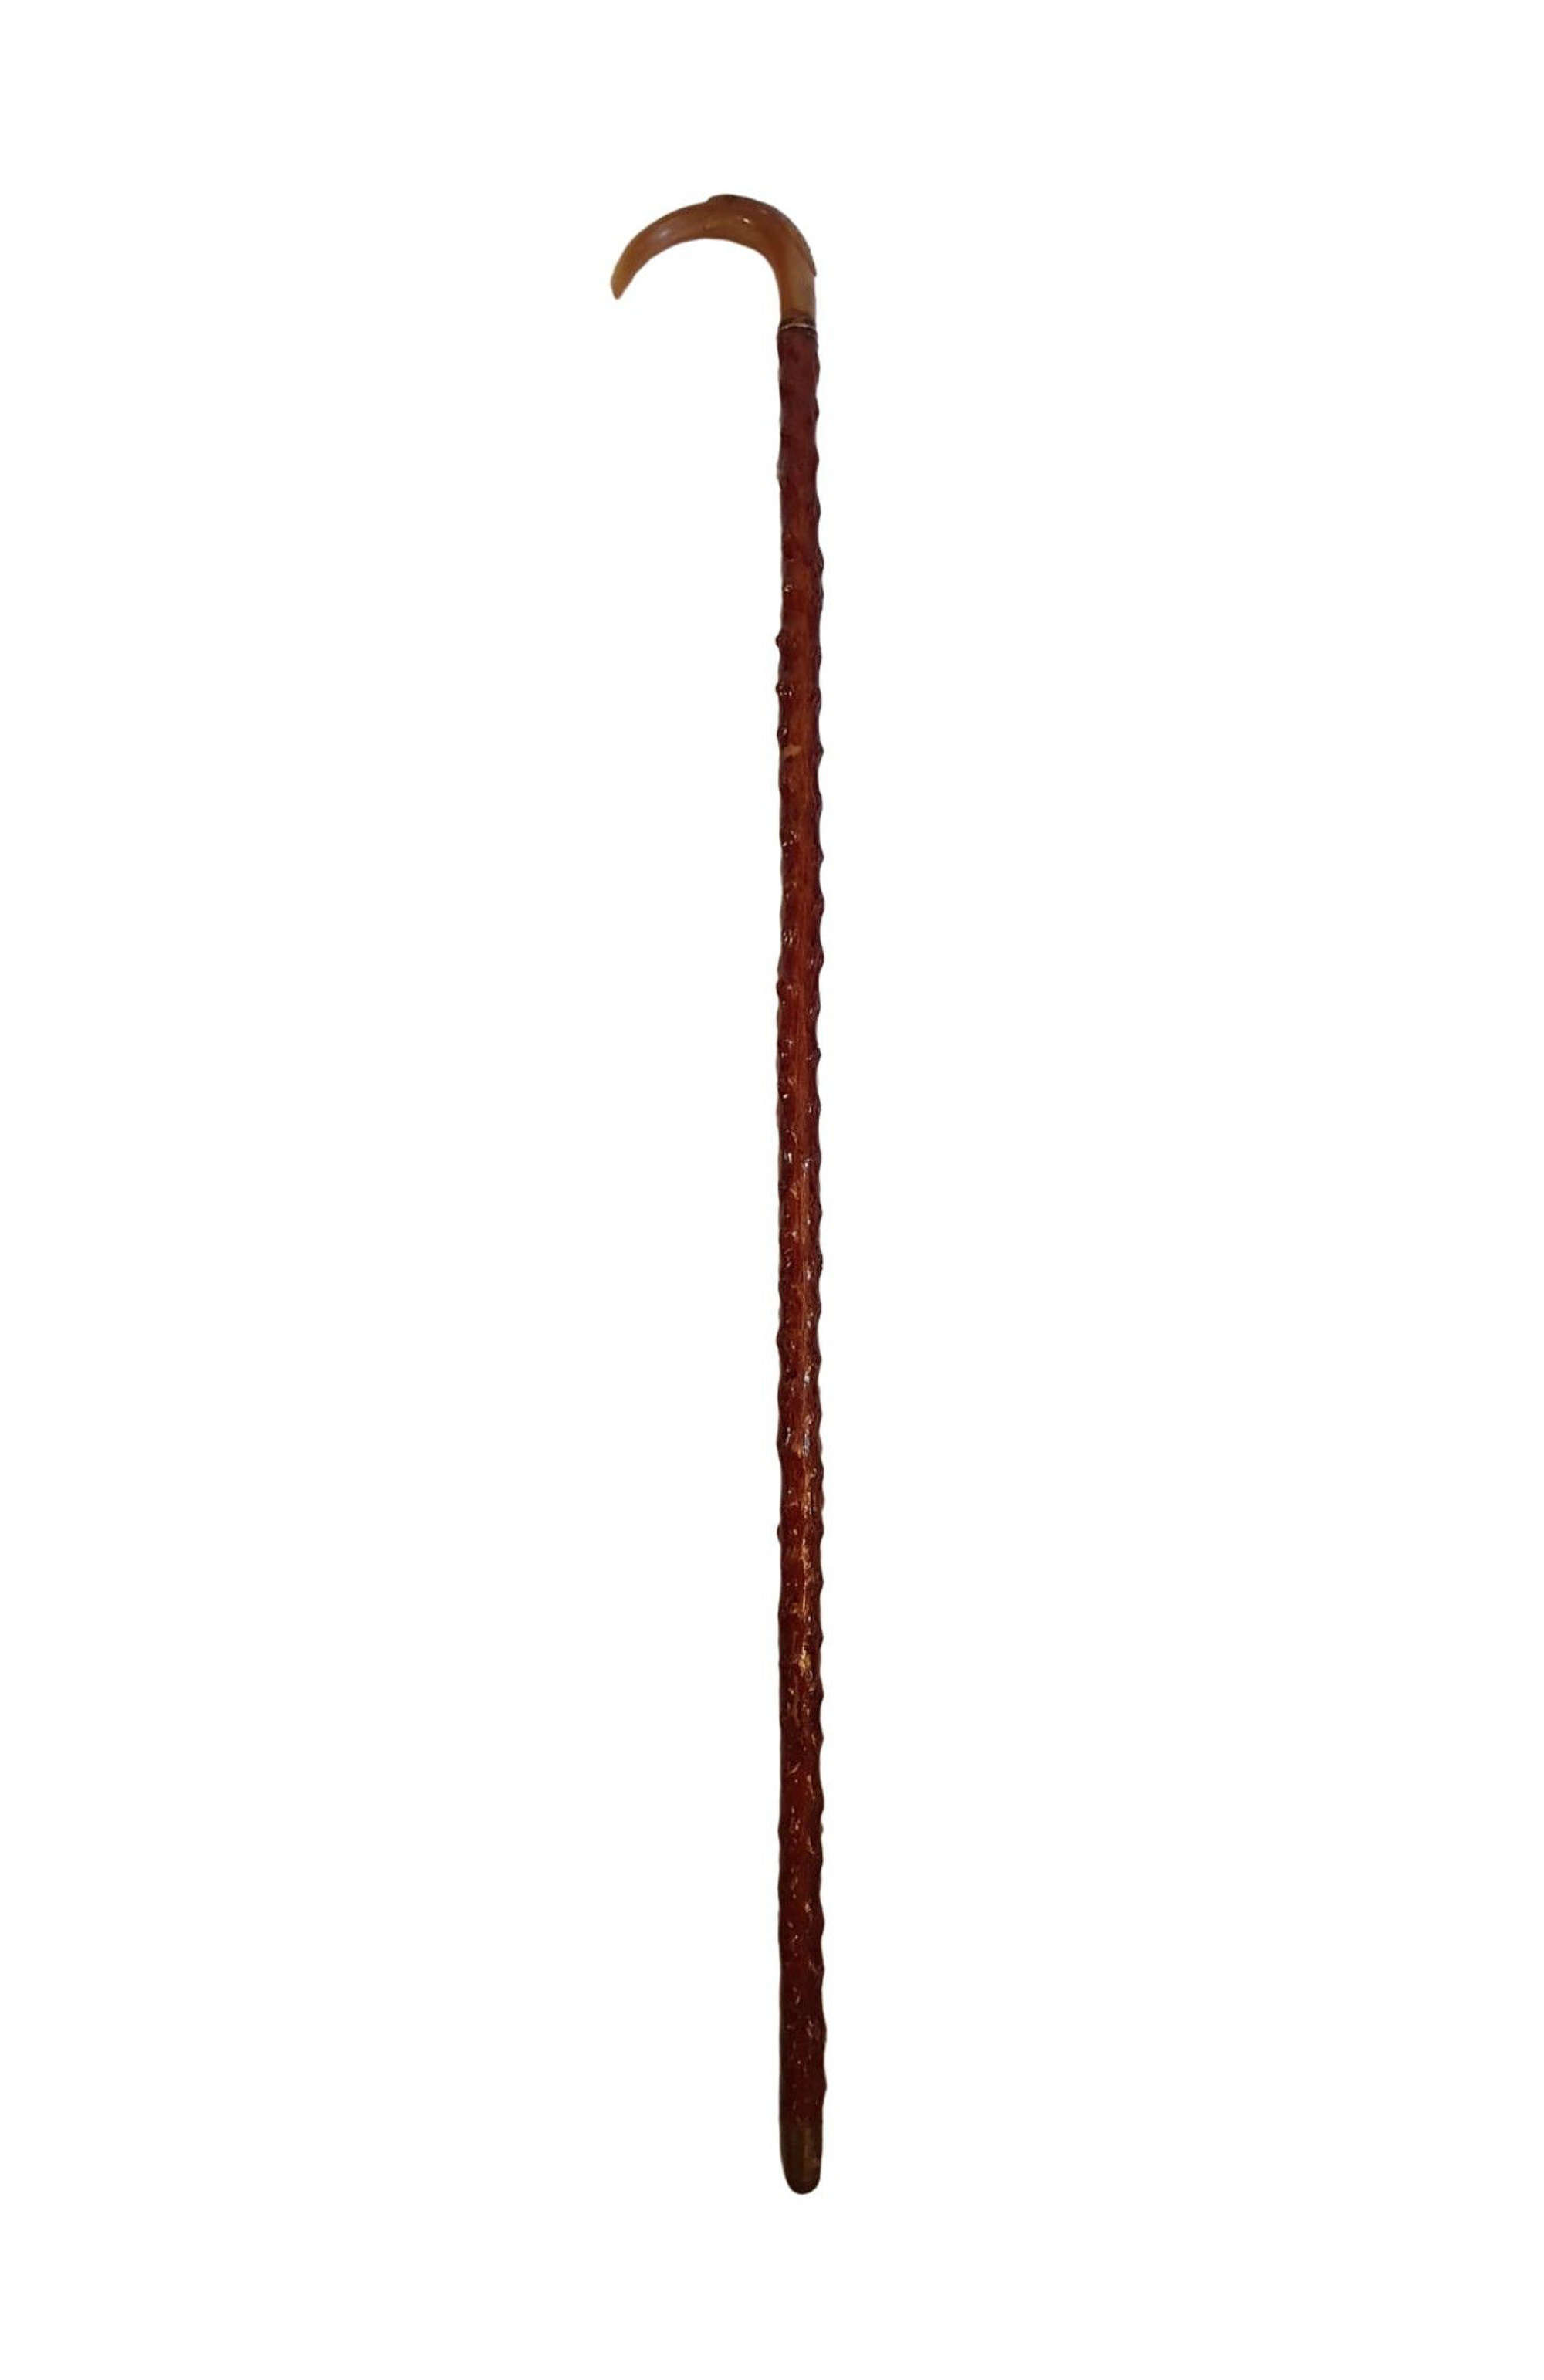 A Rare 19th Century Walking Stick With Carved Bird Head Handle